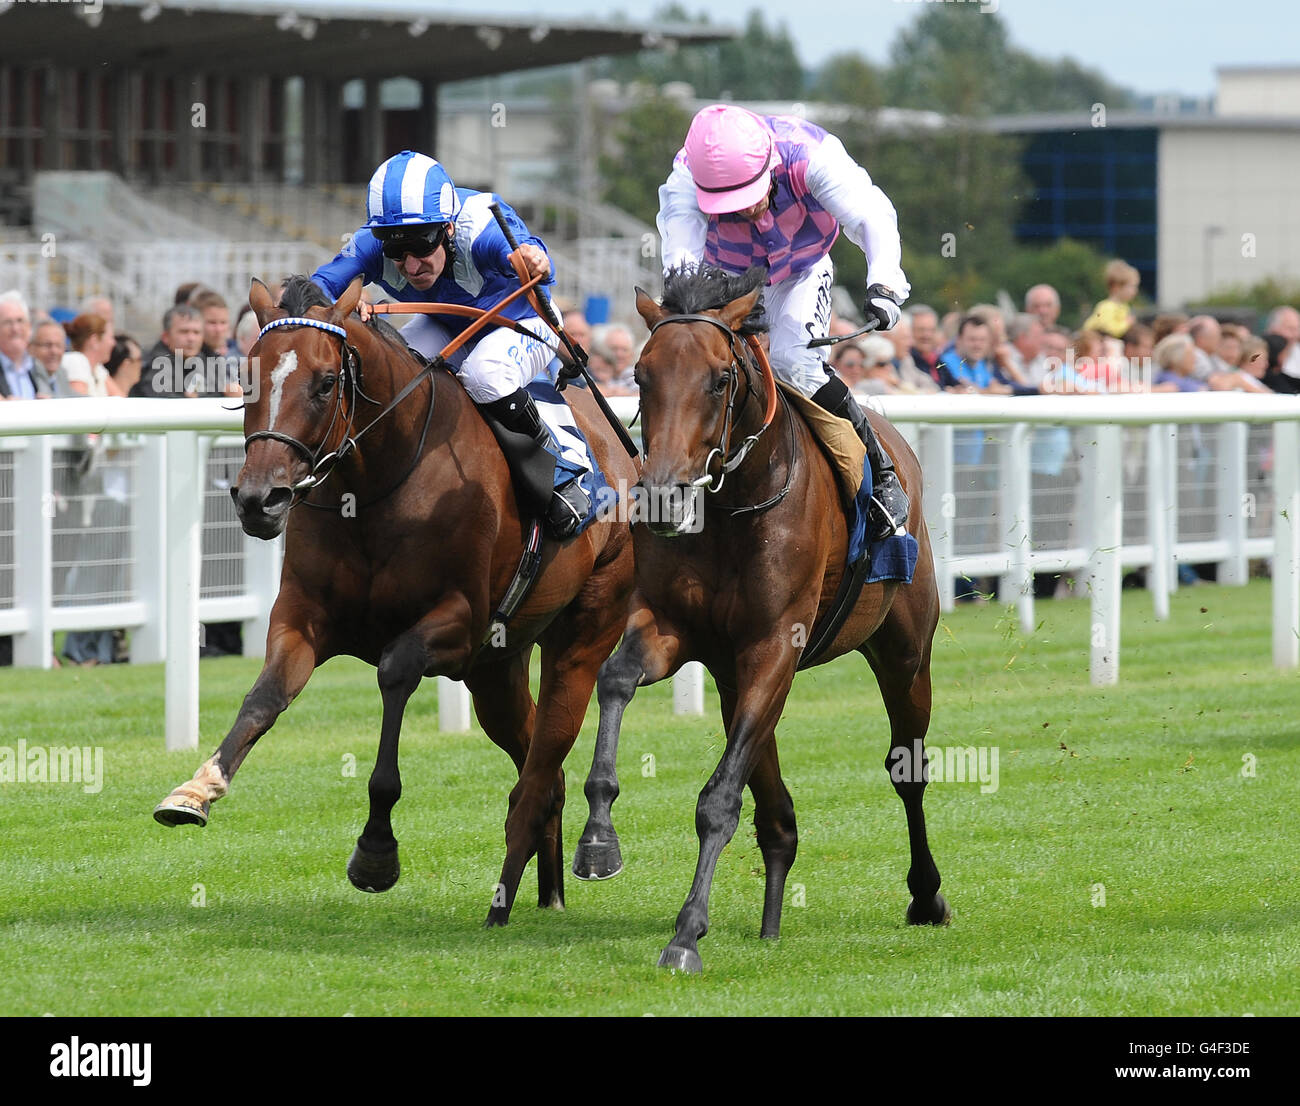 Tales of Grimm ridden by Kieren Fallon (right) winners of The Don Deadman Memorial European Breeders' Fund Maiden Stakes (Div 1) from Firdaws ridden by Richard Hills Stock Photo